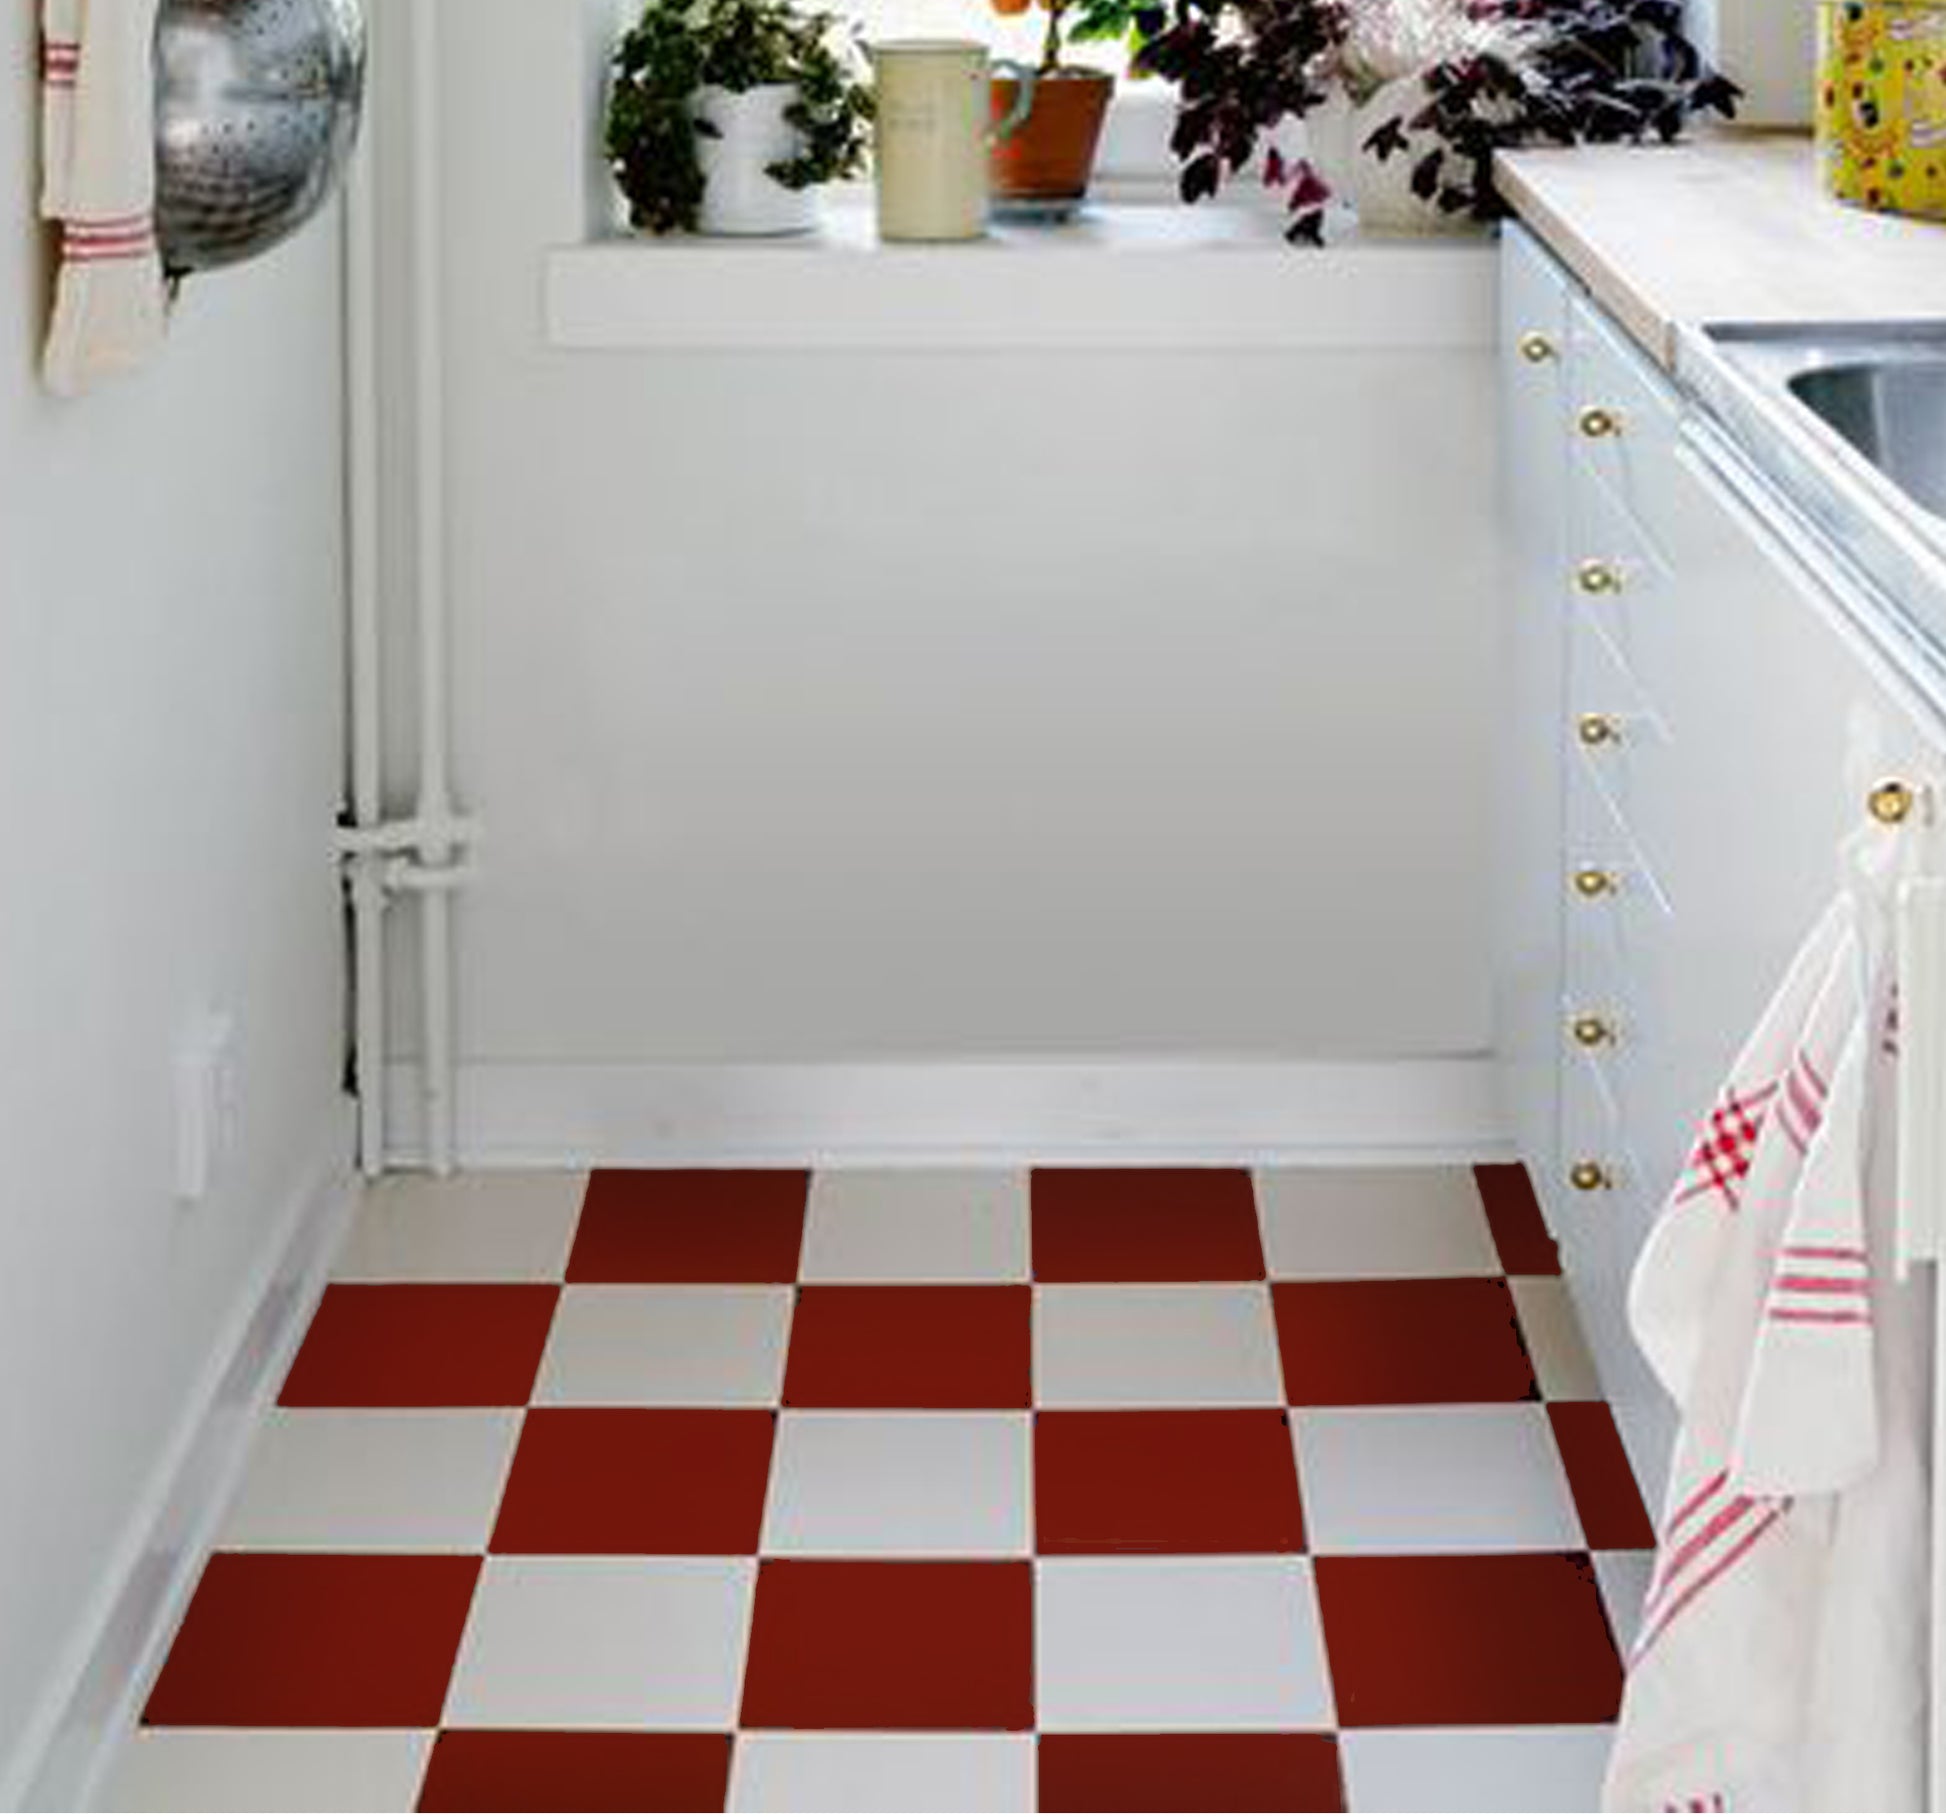 Ginger & off White Checker Solid Tile Wall Stair Floor Self